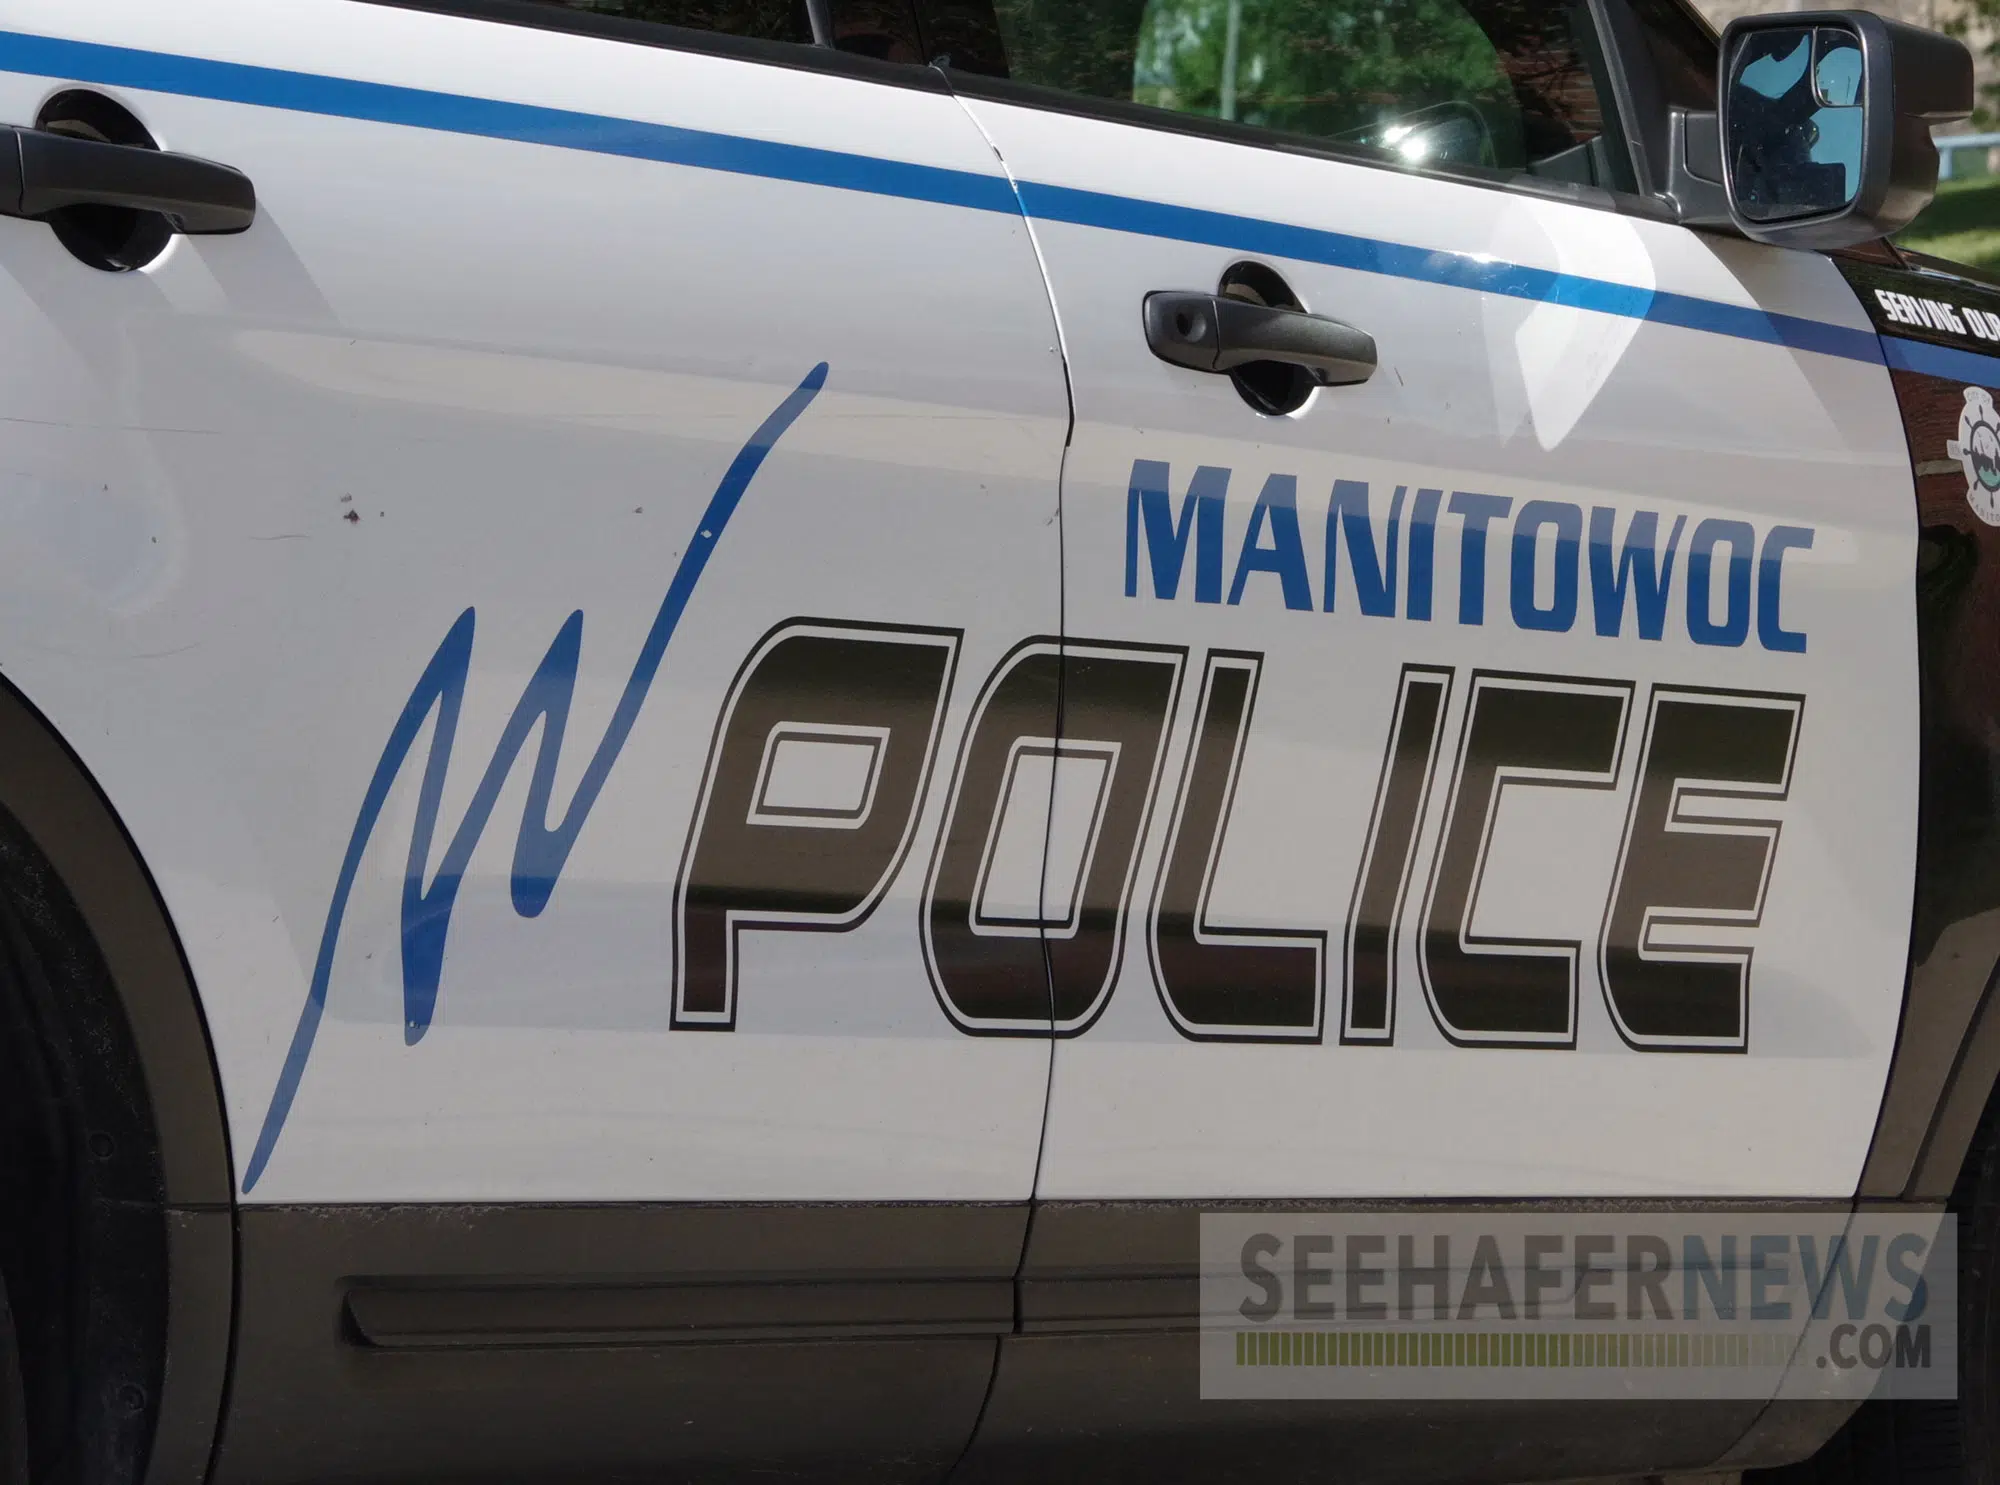 Man Caught Attempting to Steal from the Manitowoc Walmart Twice in One Day